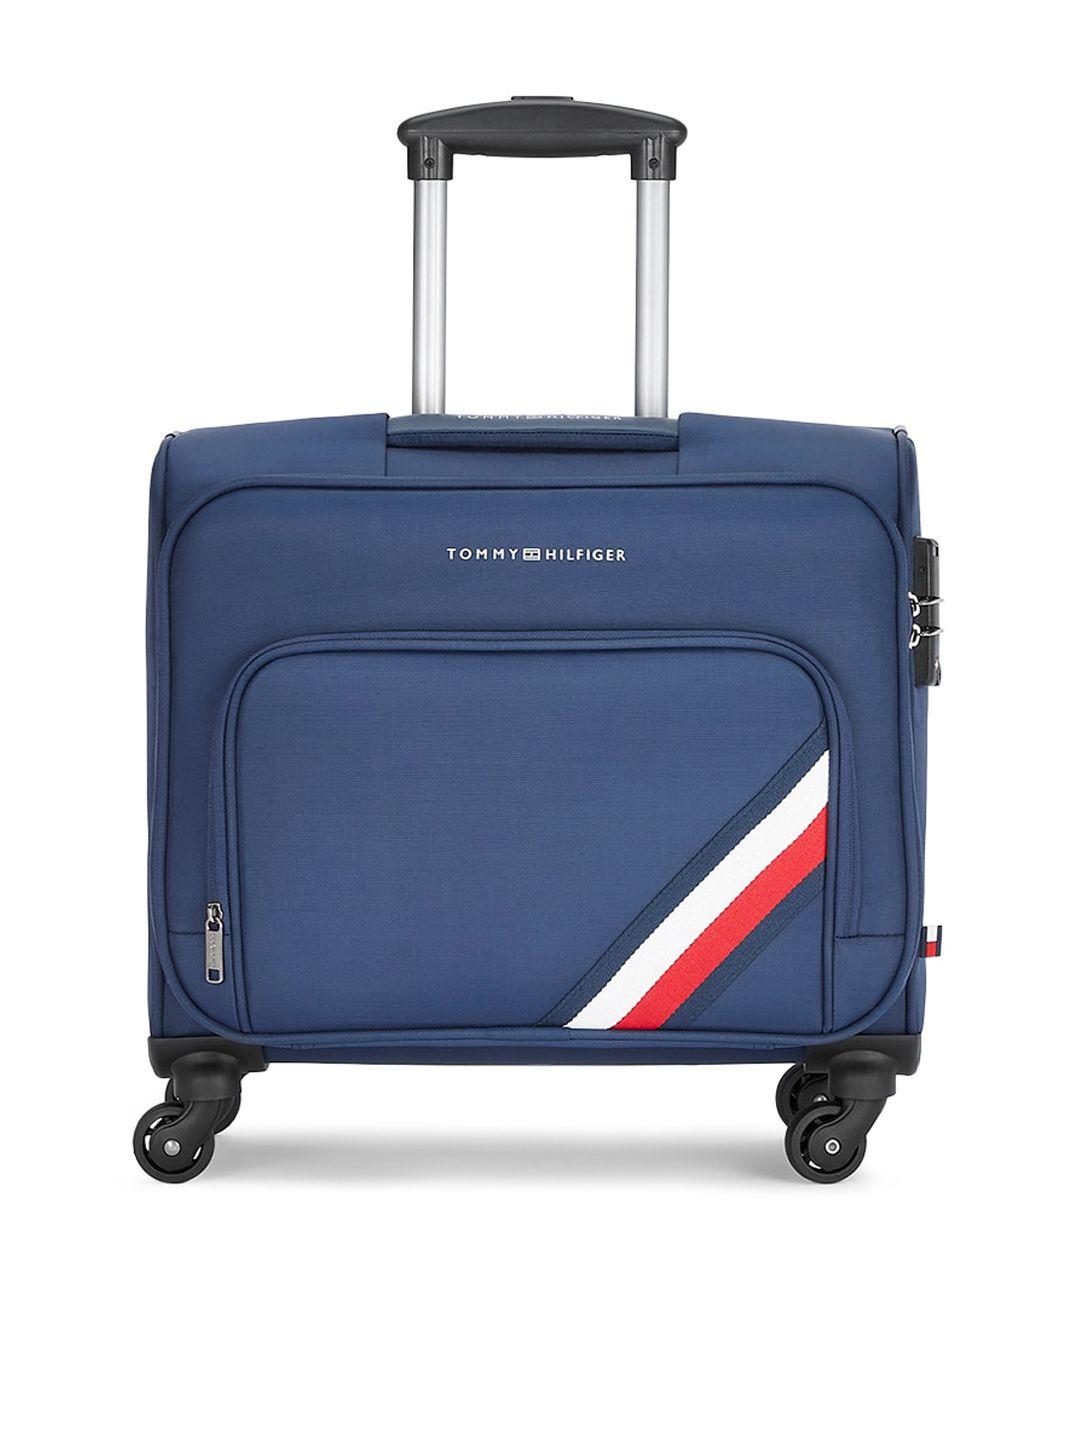 tommy hilfiger navy blue soft-sided trolley suitcase- 50 litres